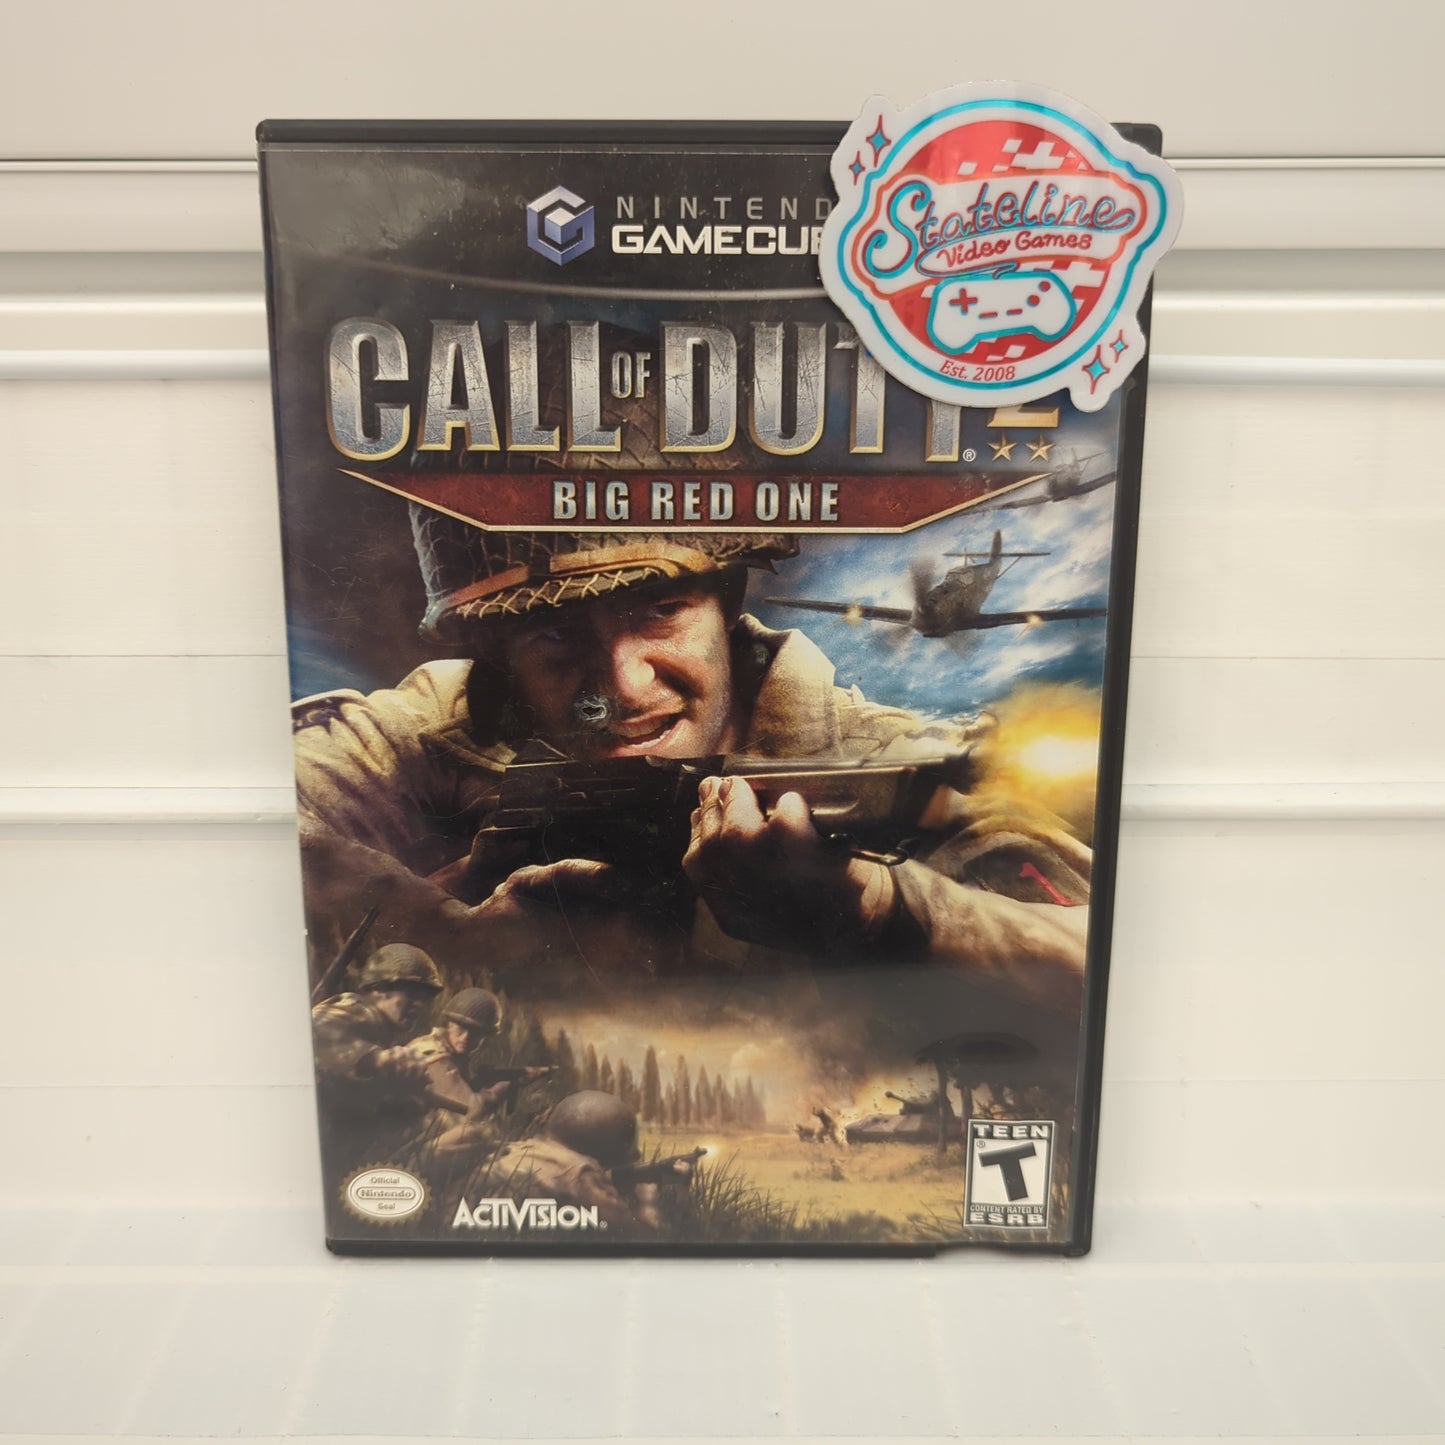 Call of Duty 2 Big Red One - Gamecube